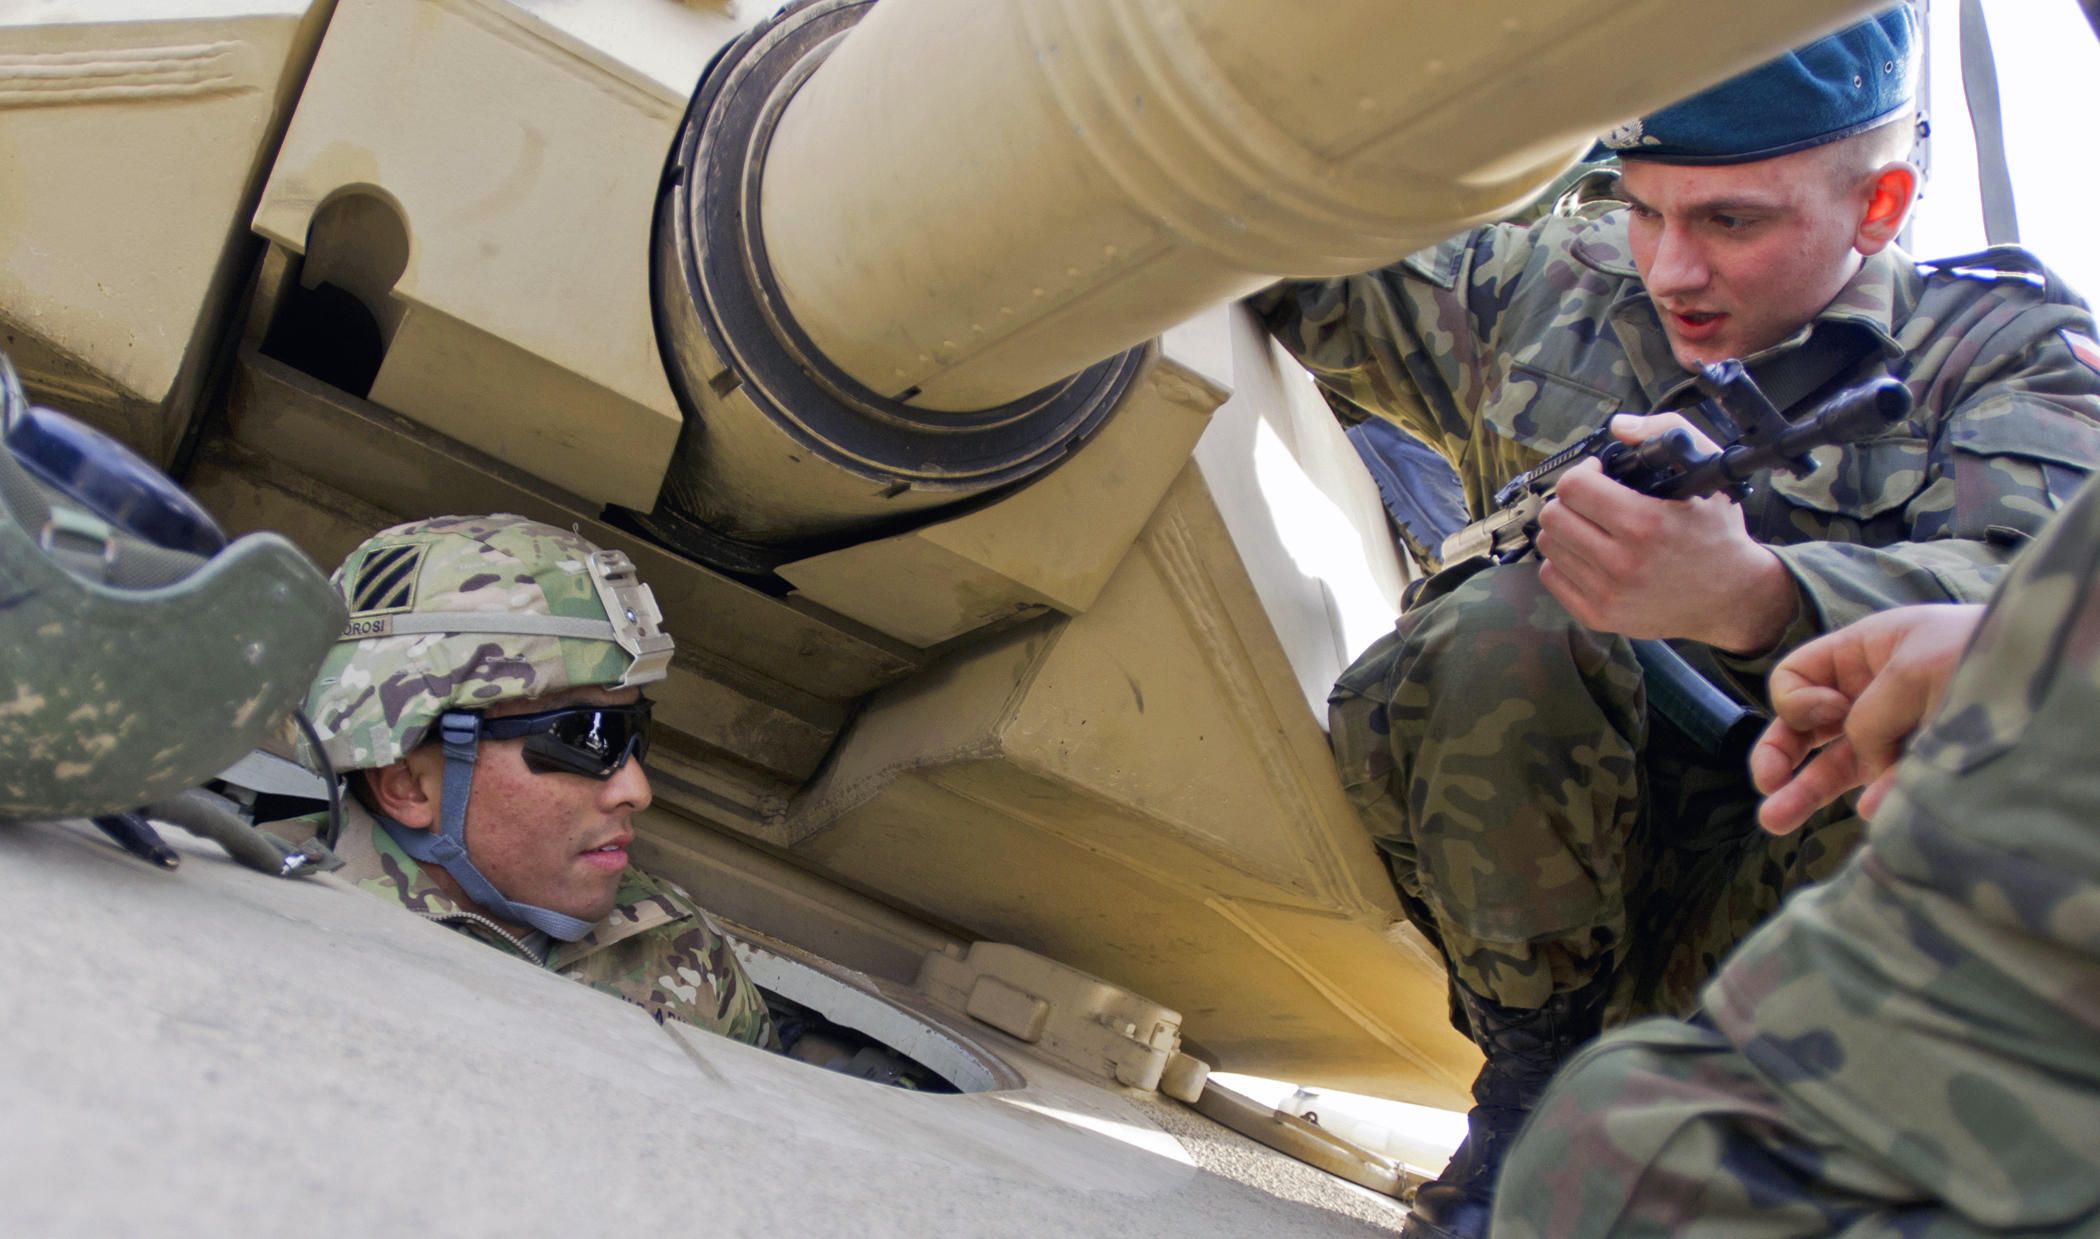 Pfc. John Morosi, assigned to the “Death Riders” Company, 2nd Battalion, 7th Infantry Regiment, 1st Armor Brigade Combat Team, 3rd Infantry Division, familiarizes his Polish counterparts on the finer points of the M1 Abrams Main Battle Tank during Operation Atlantic Resolve in March. (Photo by Staff Sgt. Cooper T. Cash)